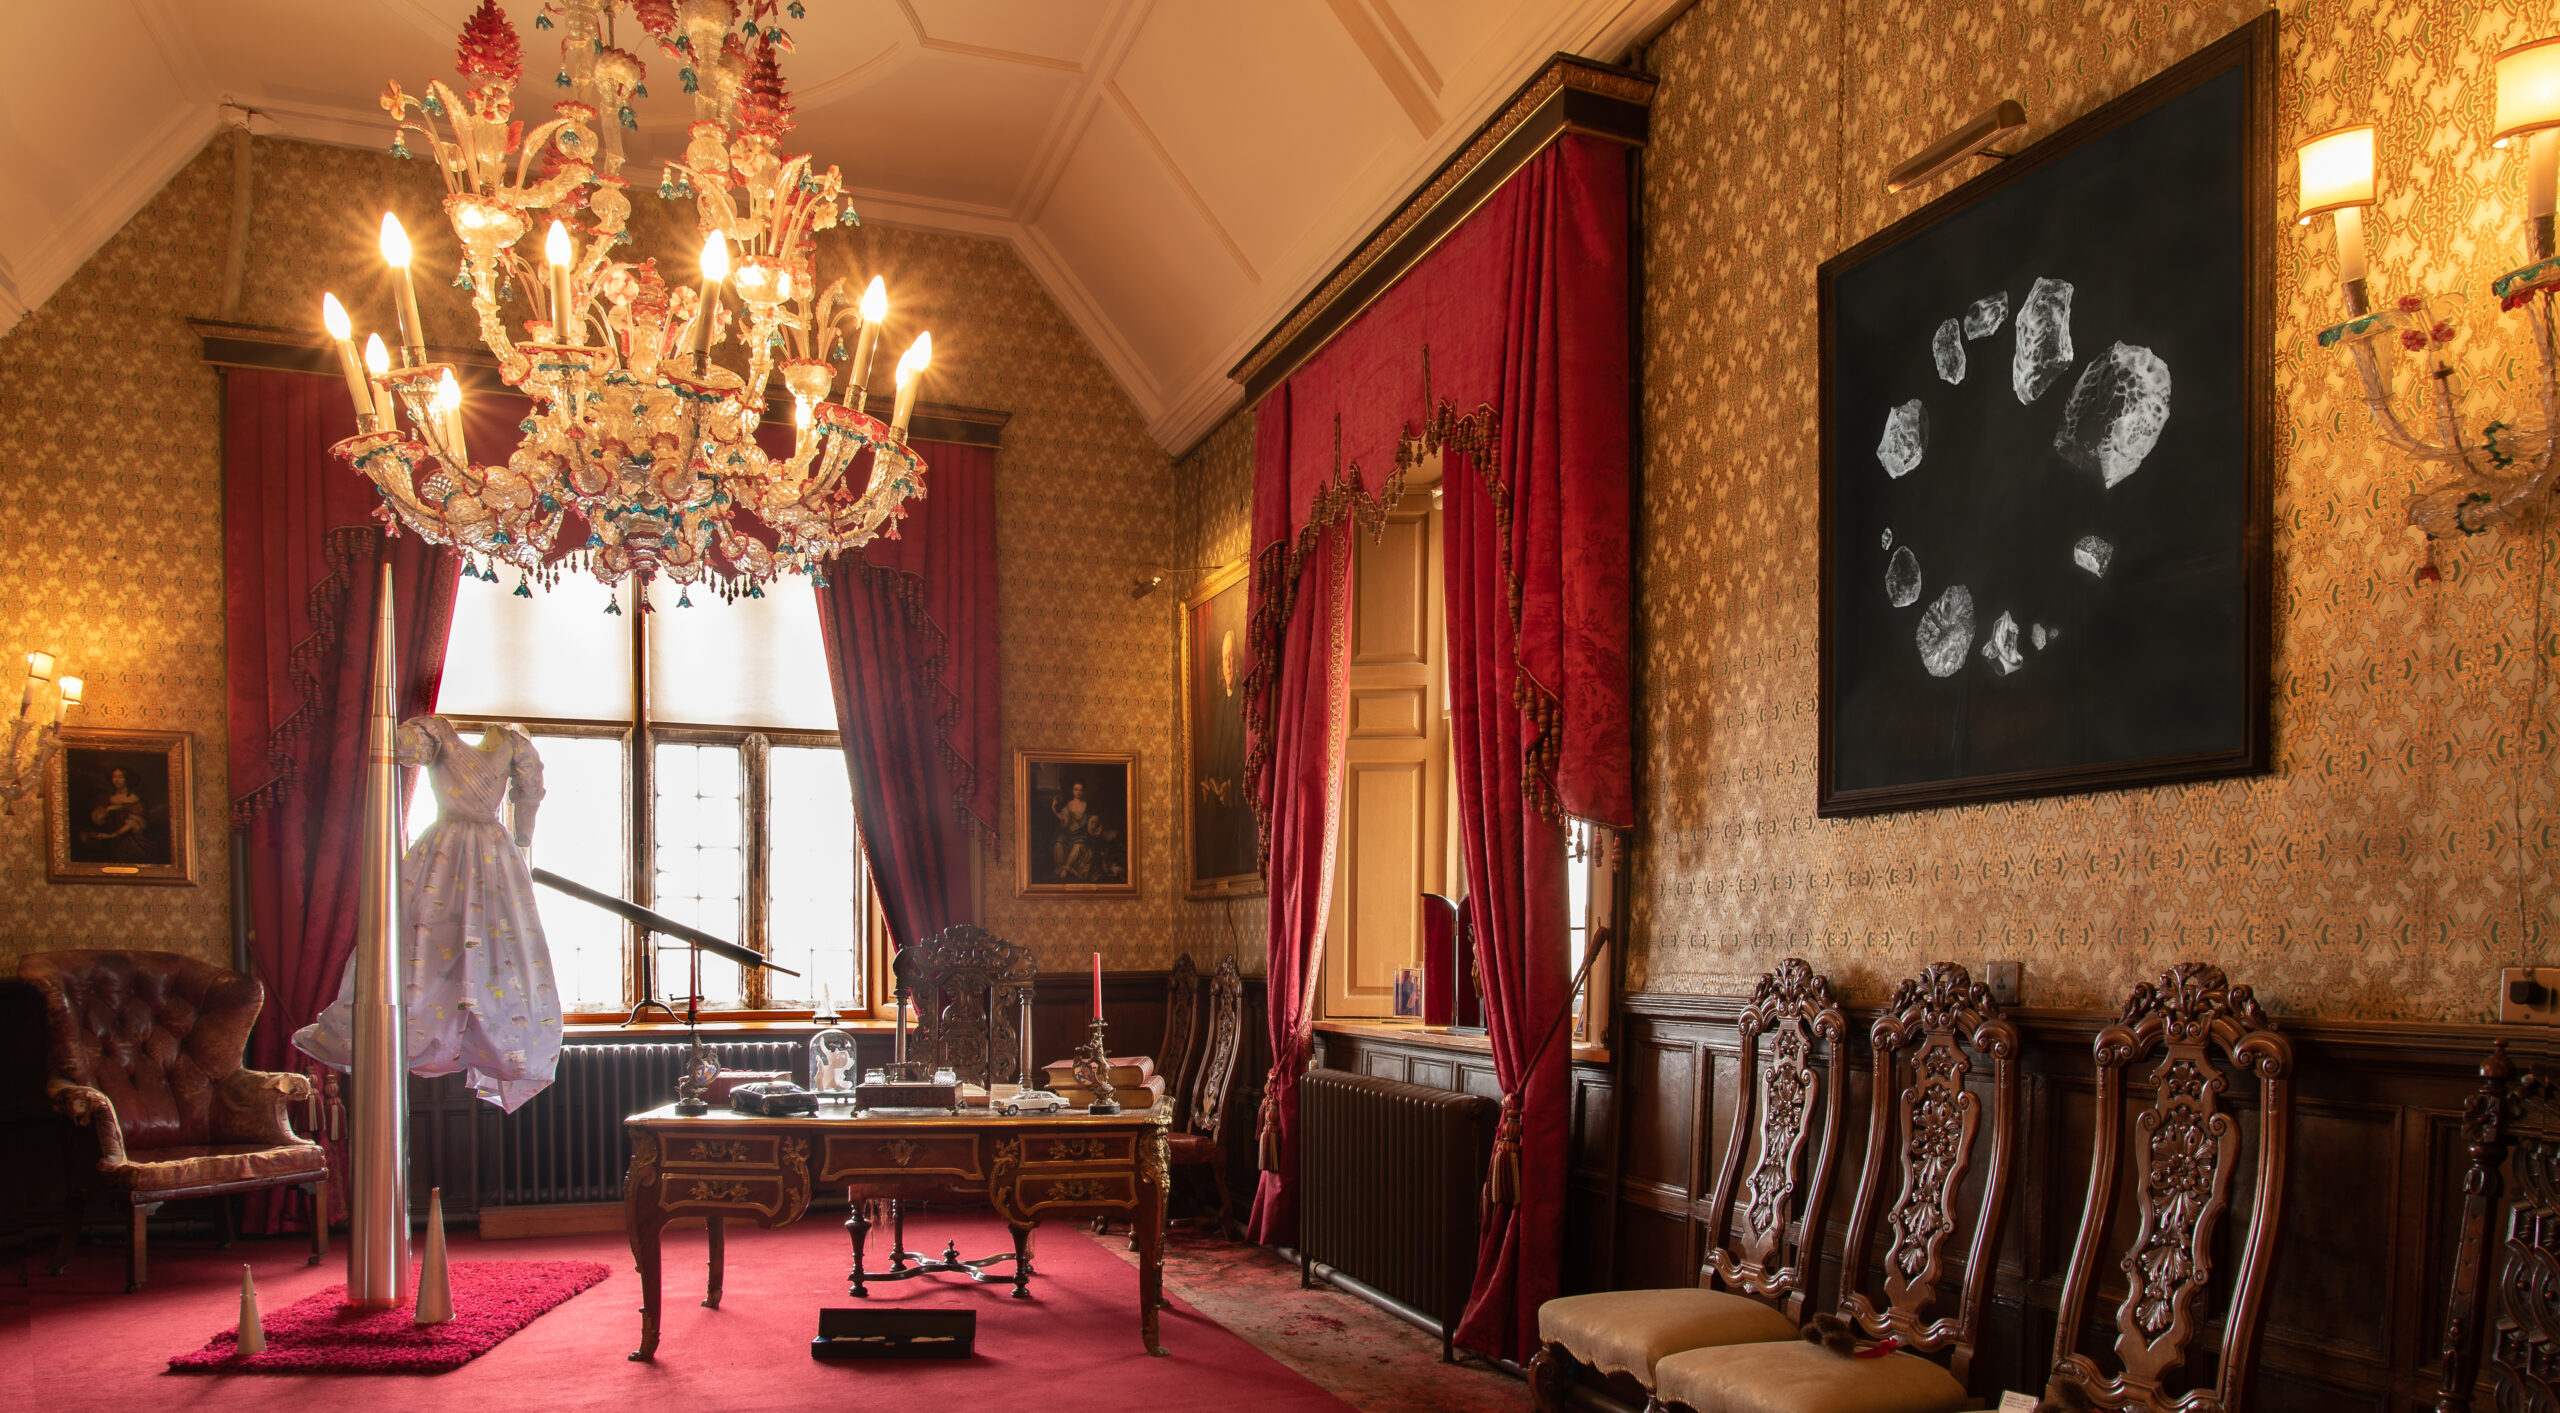 long, grand room inside a stately home, with a red carpet and gold and white wallpaper, fittings and ceiling mouldings. At the far end of the room a dress floats in the air next to a large metal cone; on the right hand wall a drawing on black paper can be seen